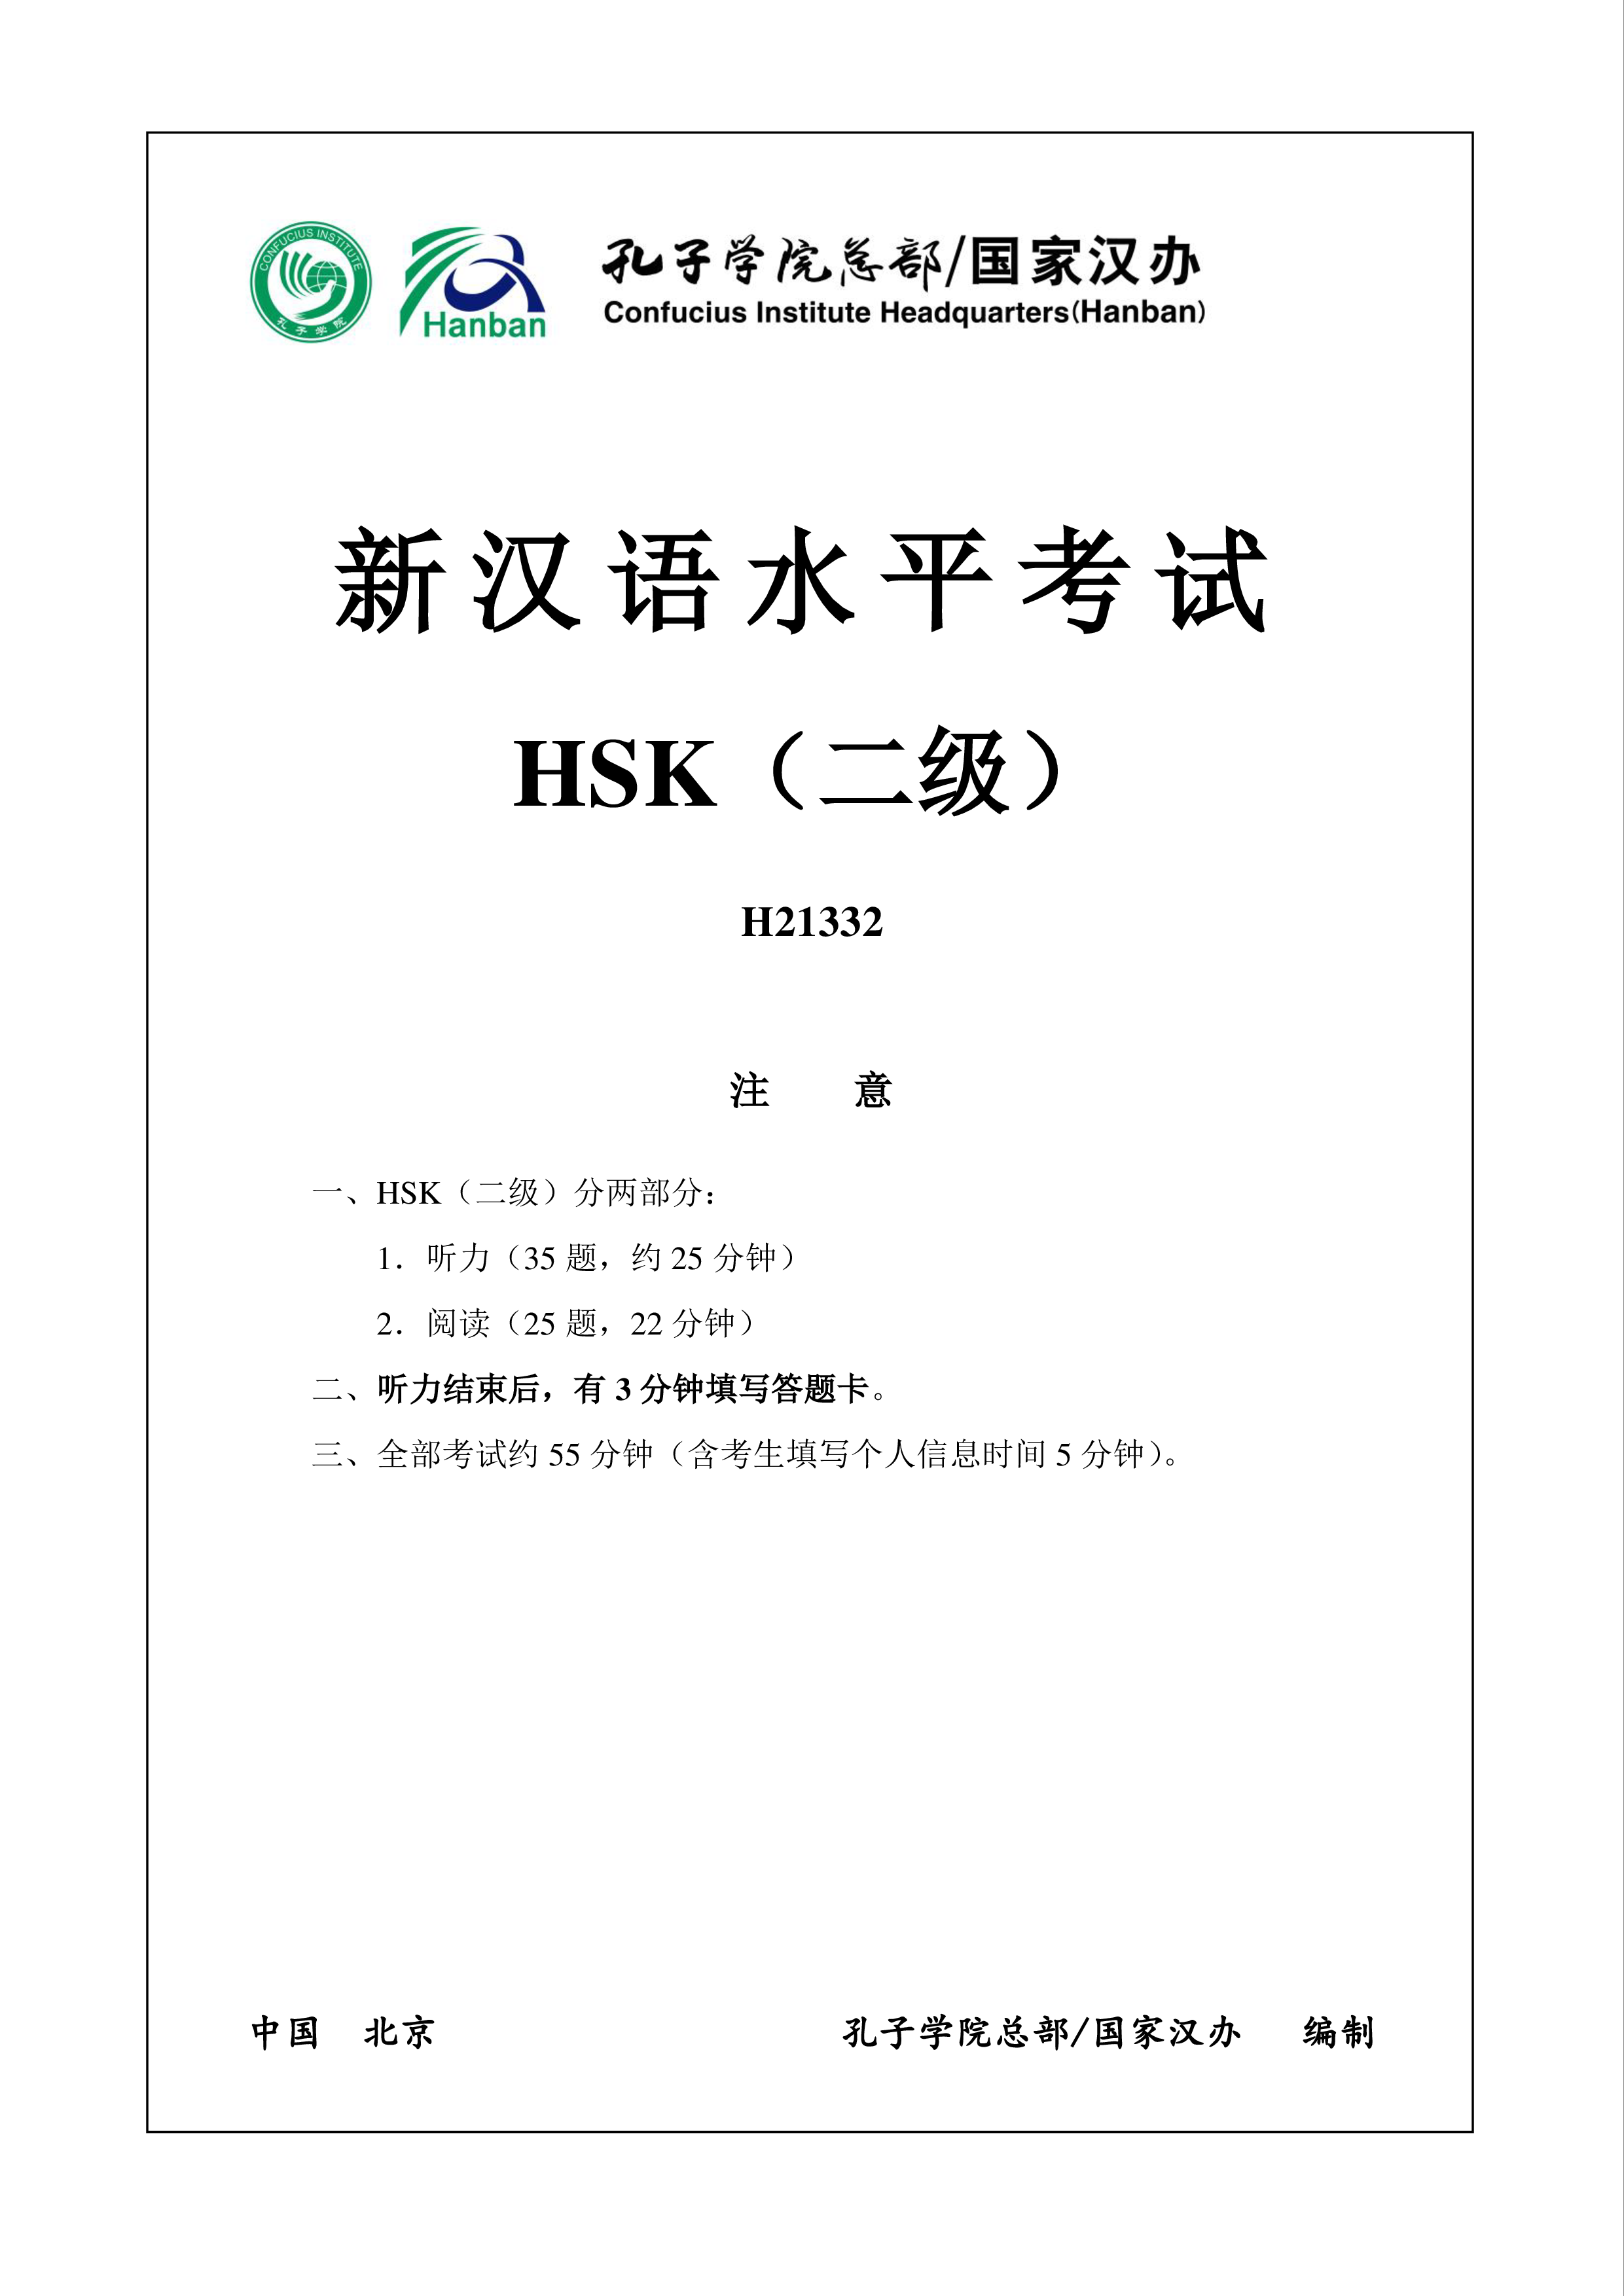 hsk2 chinese exam including answers # hsk2 h21332 modèles